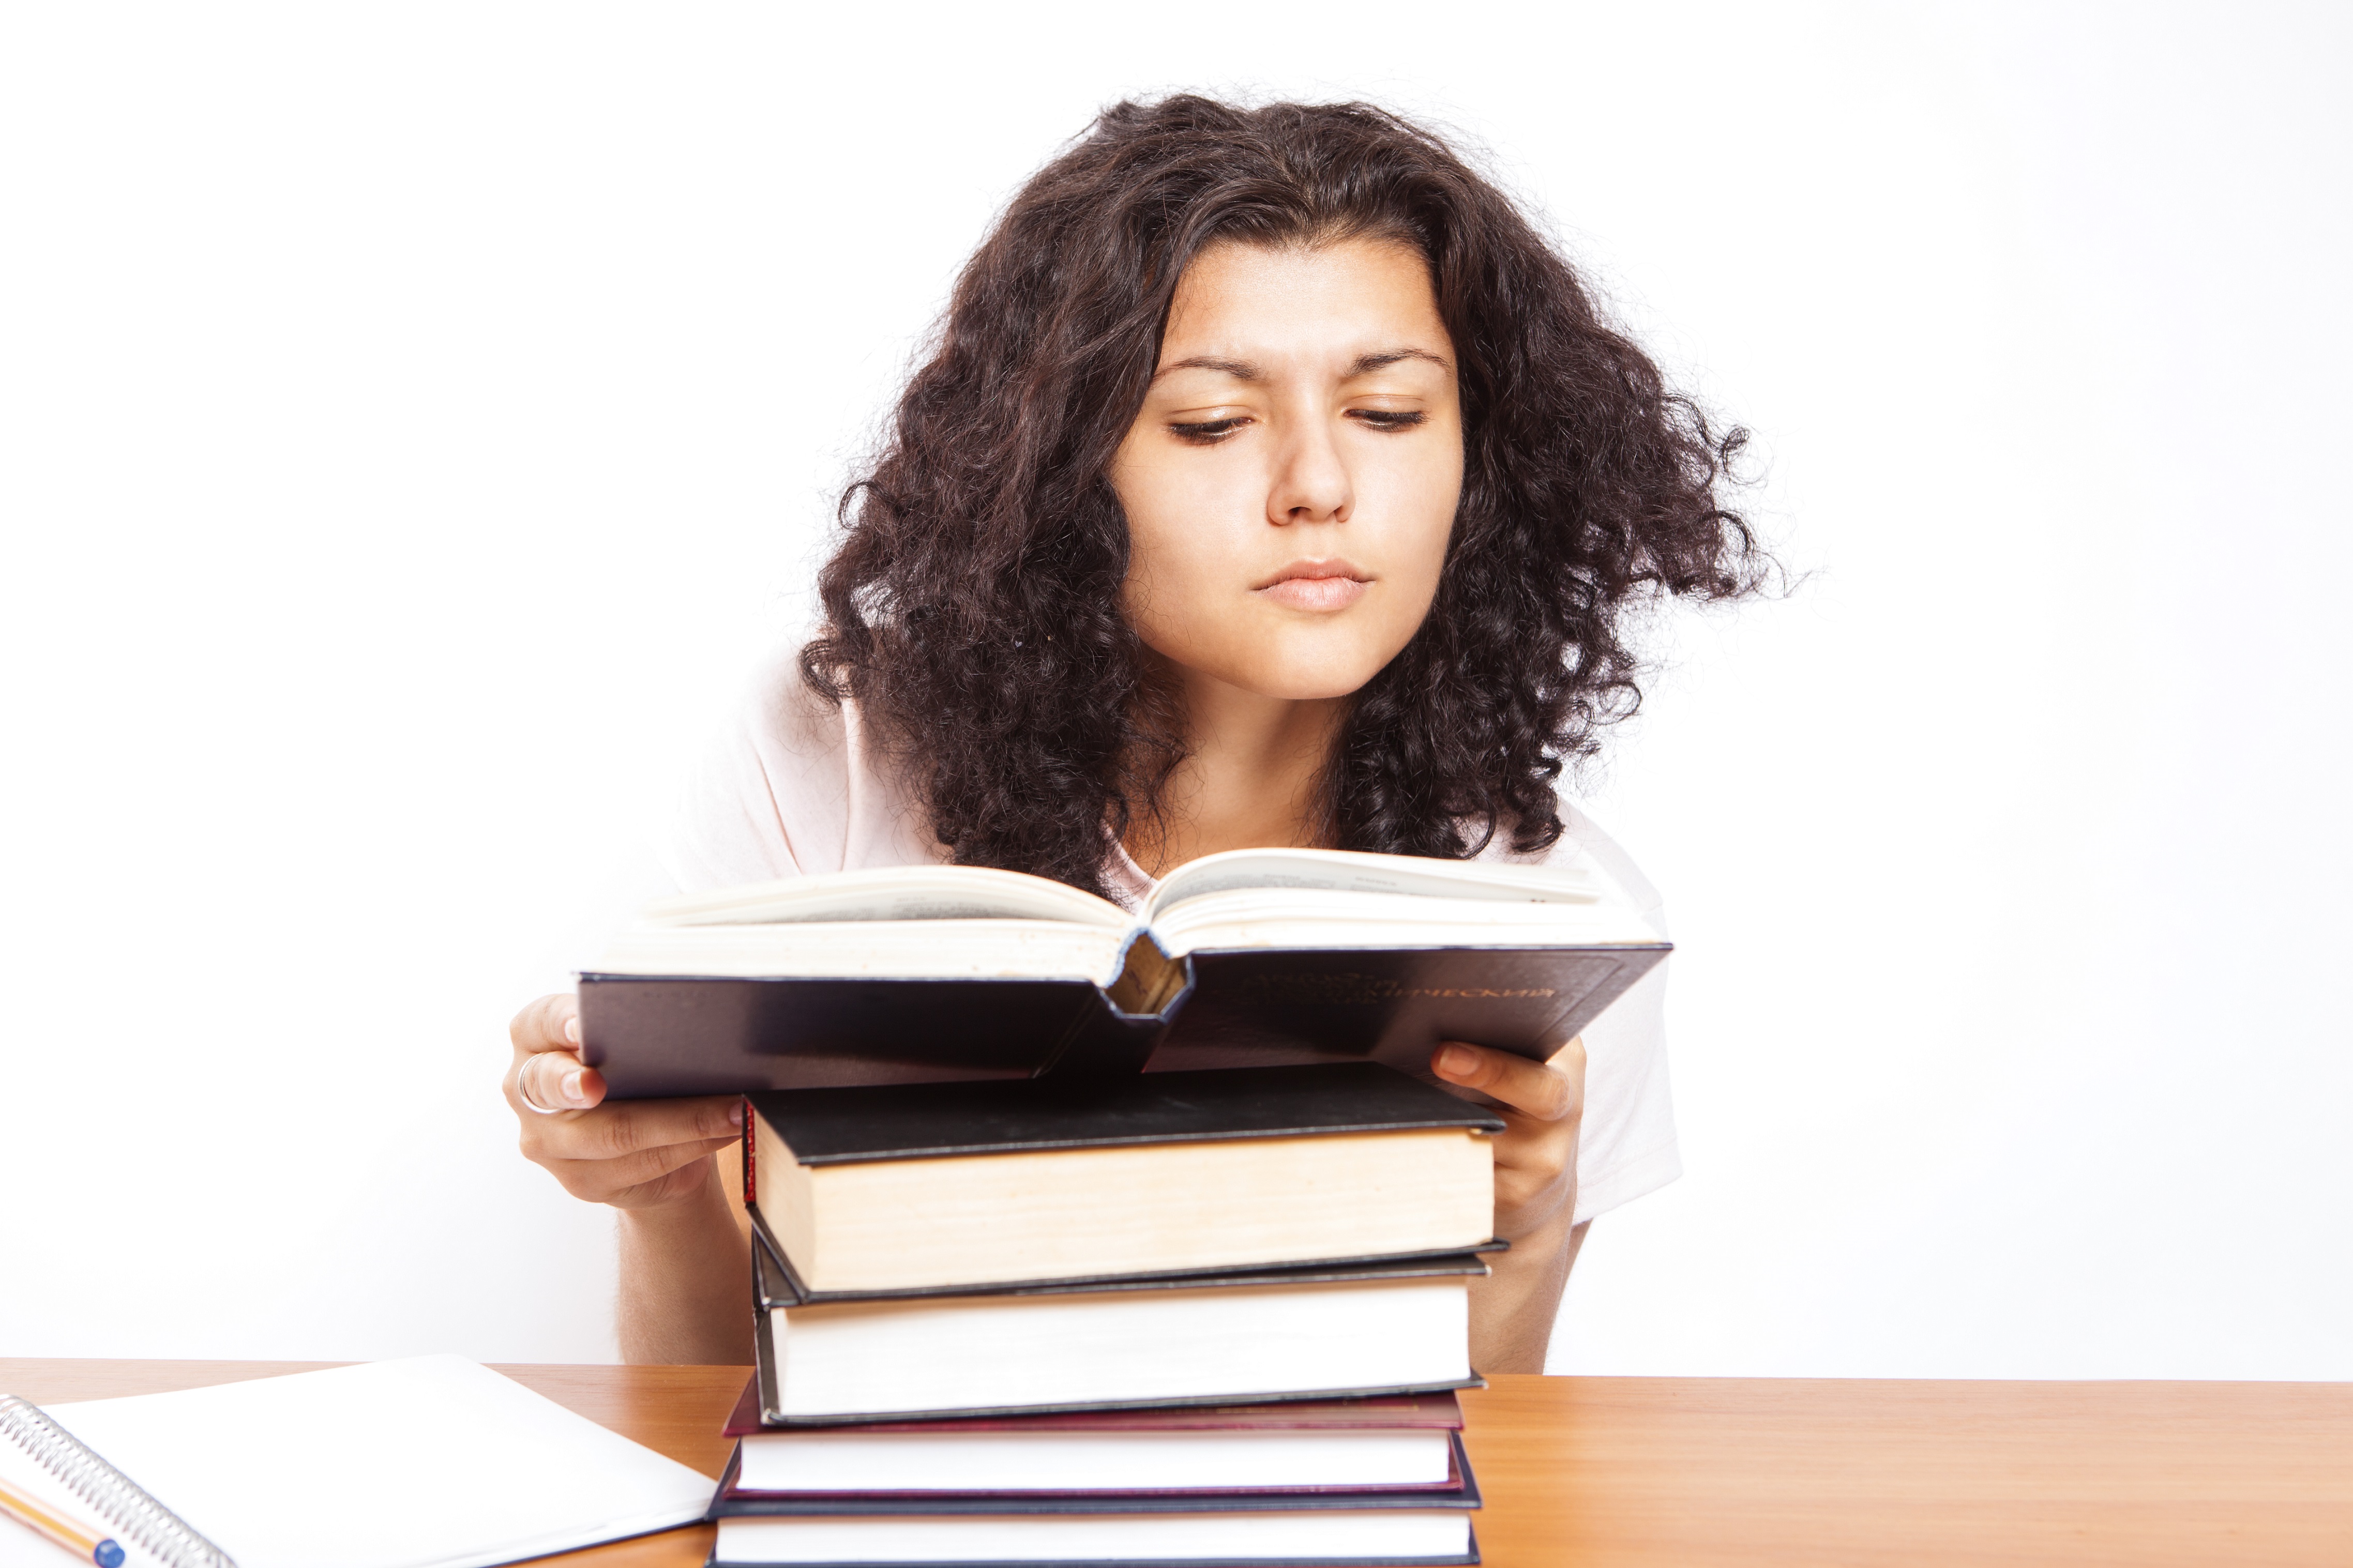 Girl with a stack of books reading inquisitively